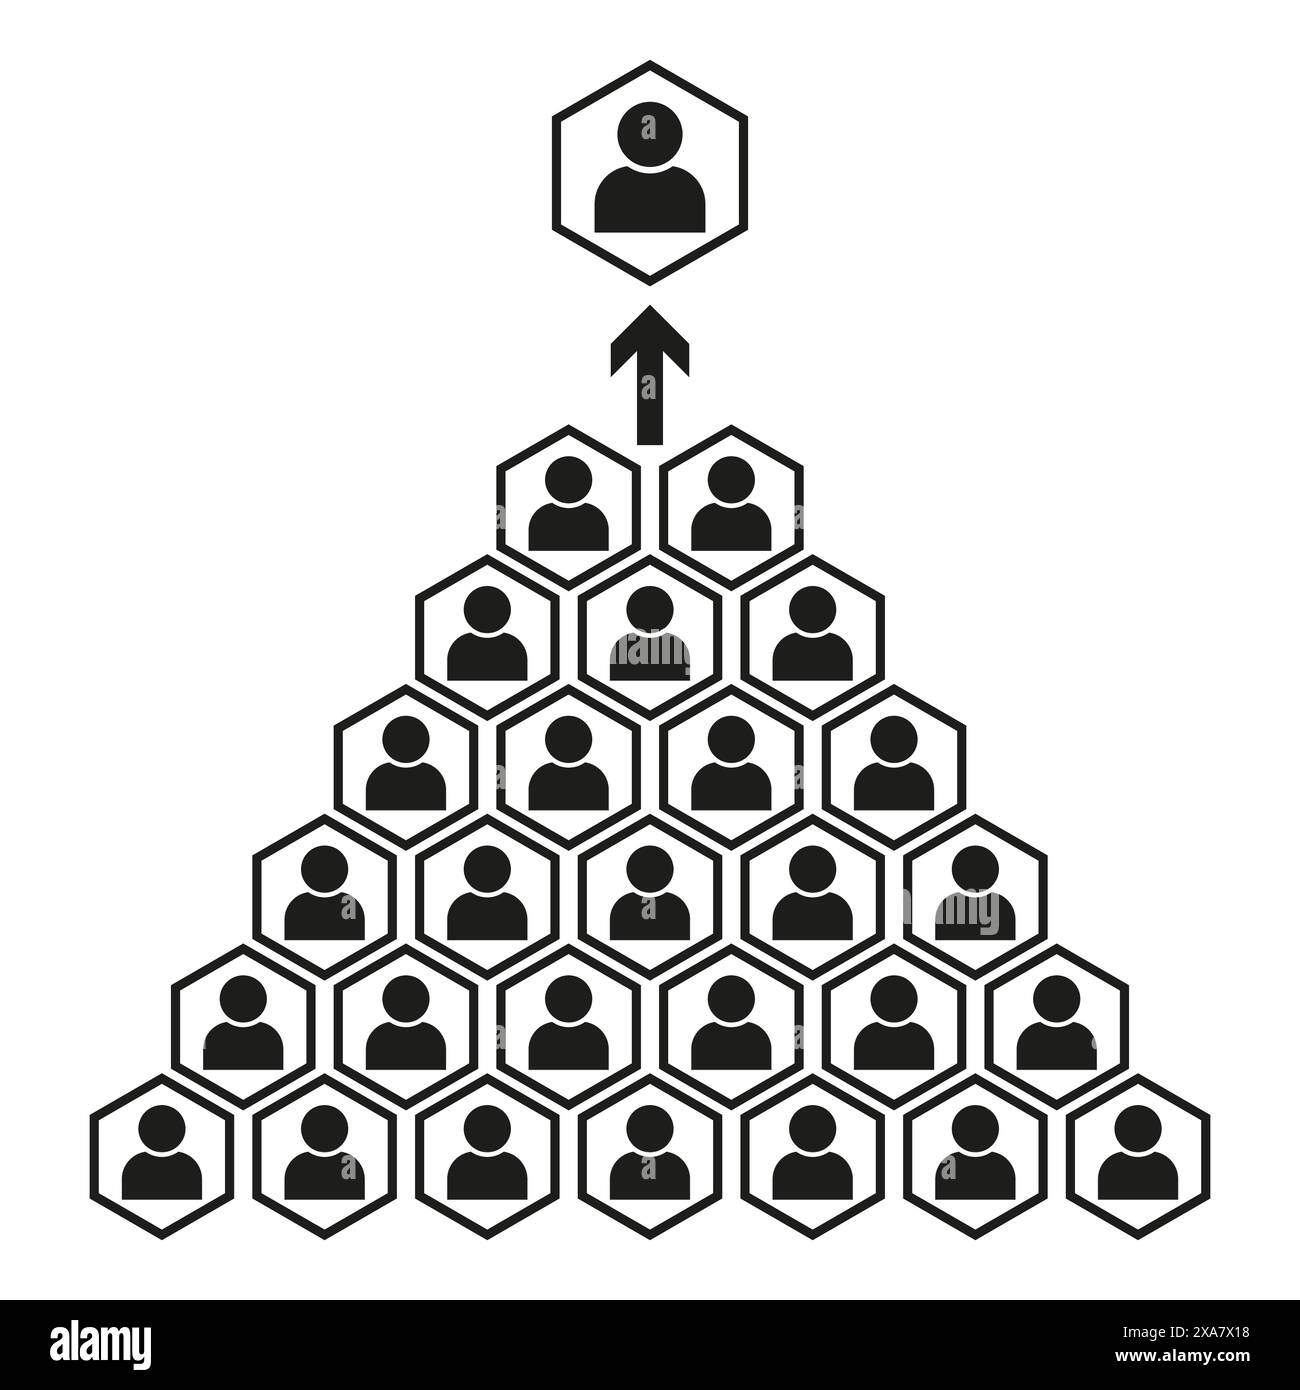 Hierarchical network vector. Leadership structure icon. Team organization chart. Hexagonal people pyramid. Stock Vector